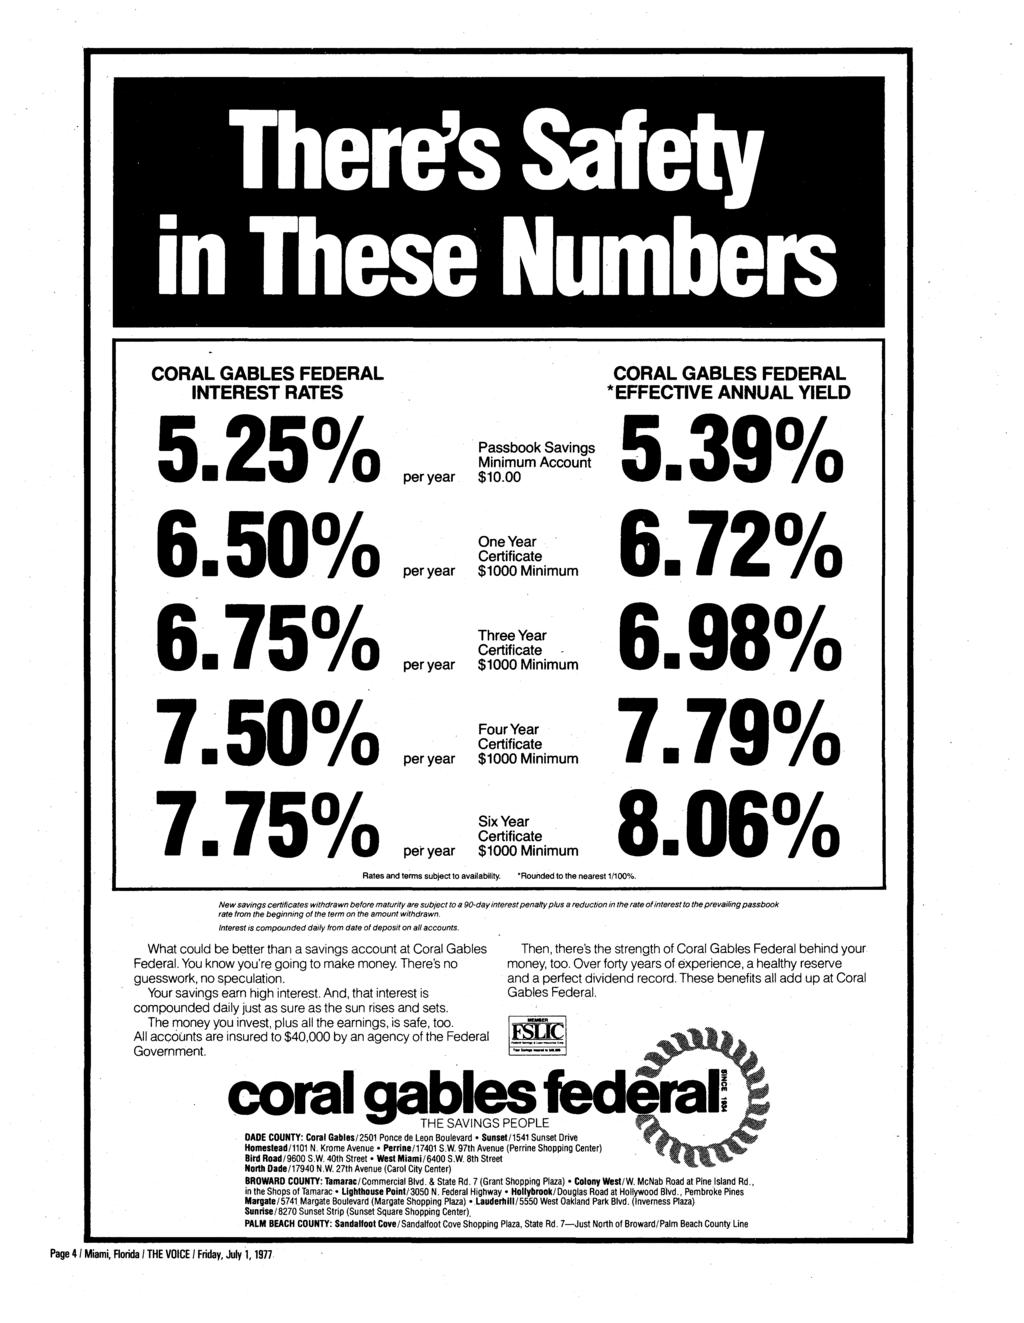 CORAL GABLES FEDERAL INTEREST RATES CORAL GABLES FEDERAL * EFFECTIVE ANNUAL YIELD 5.25% per year Passbook Savings Minimum Account $10.00 3B / 6.50% 6.75% 7.50% 7.